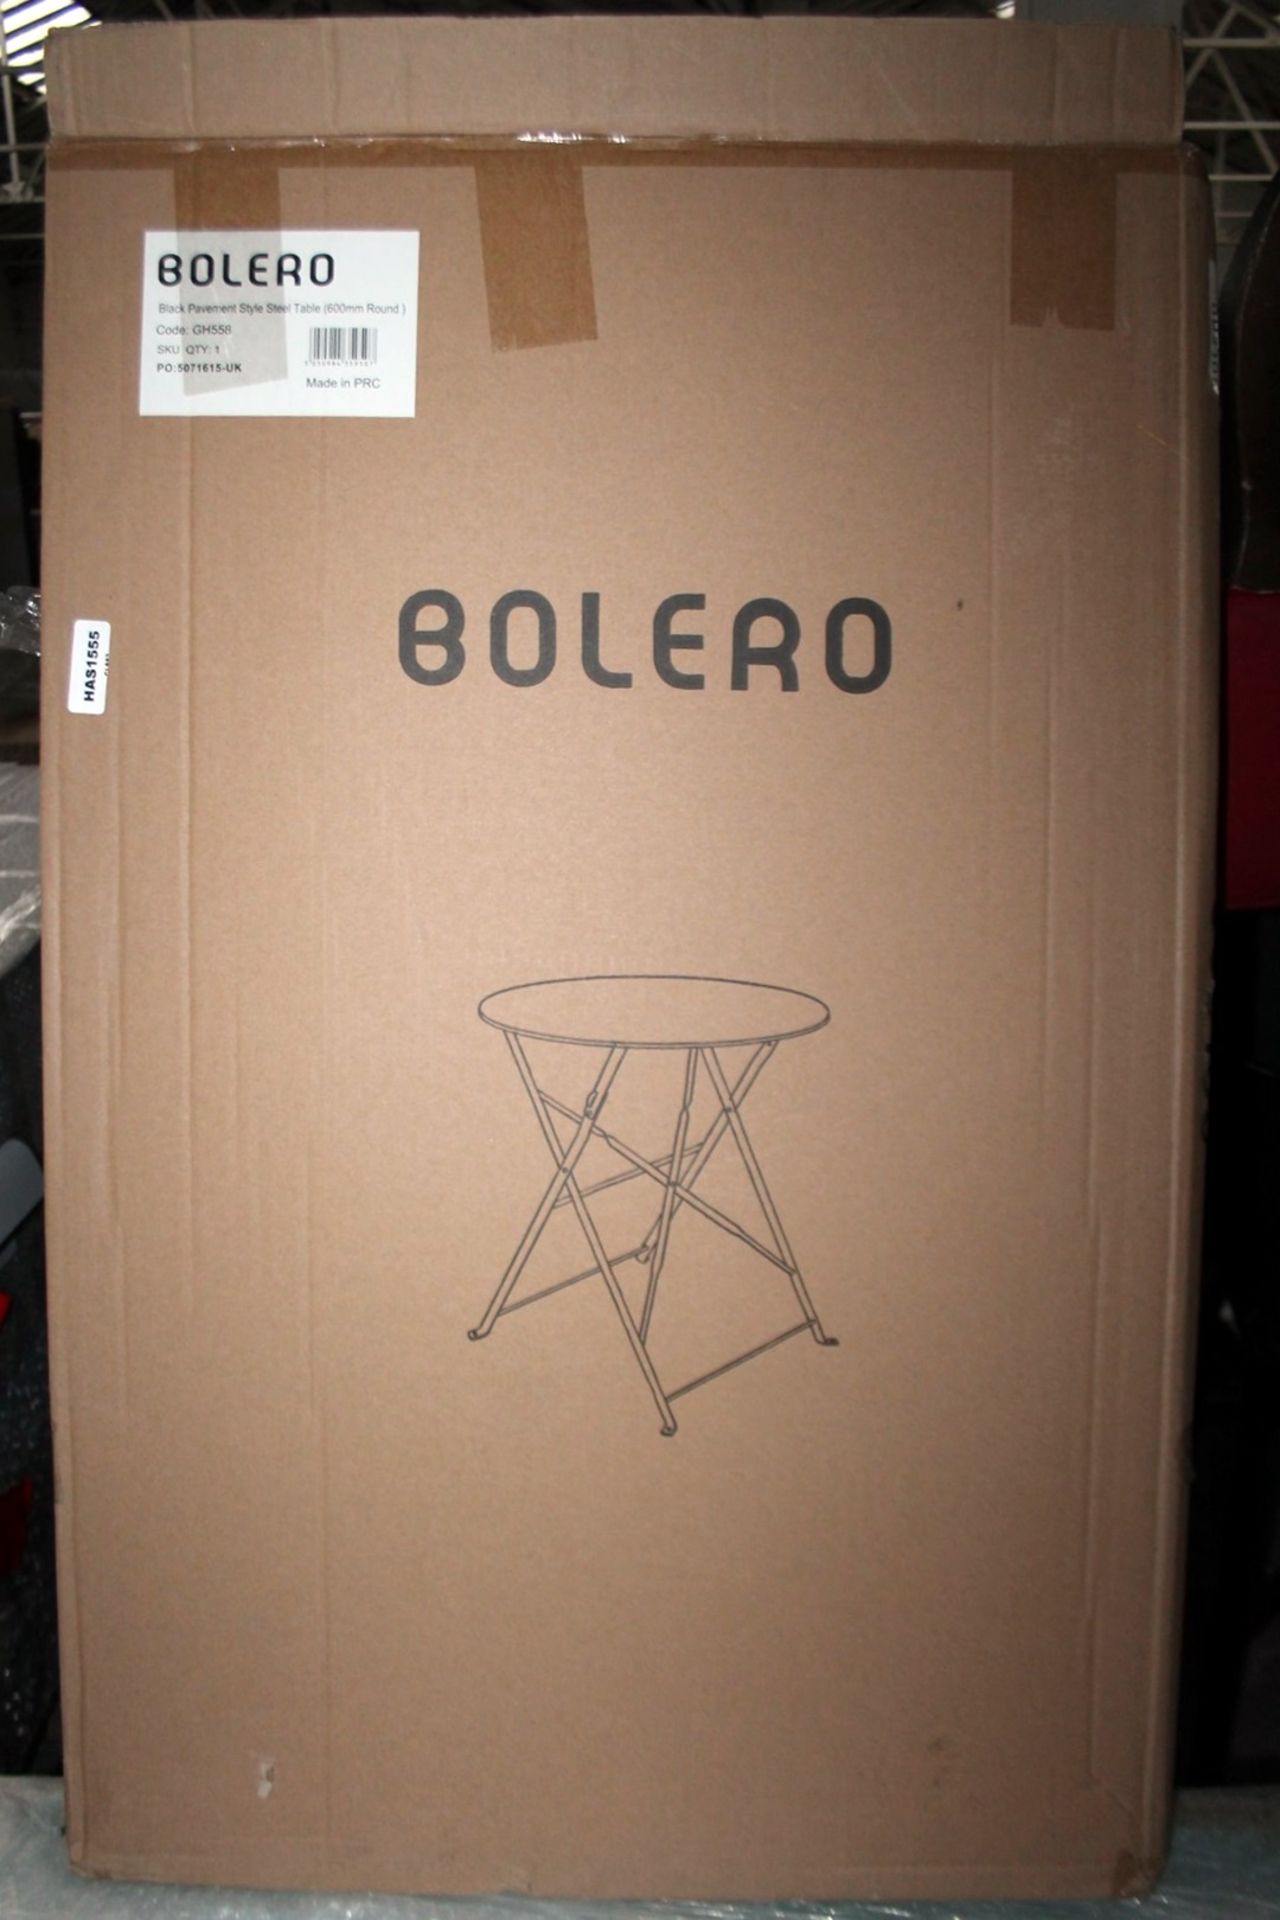 5 x BOLERO Folding Outdoor Pavement Style Steel Tables - Preowned - Total Original RRP £280.00 - Image 4 of 5